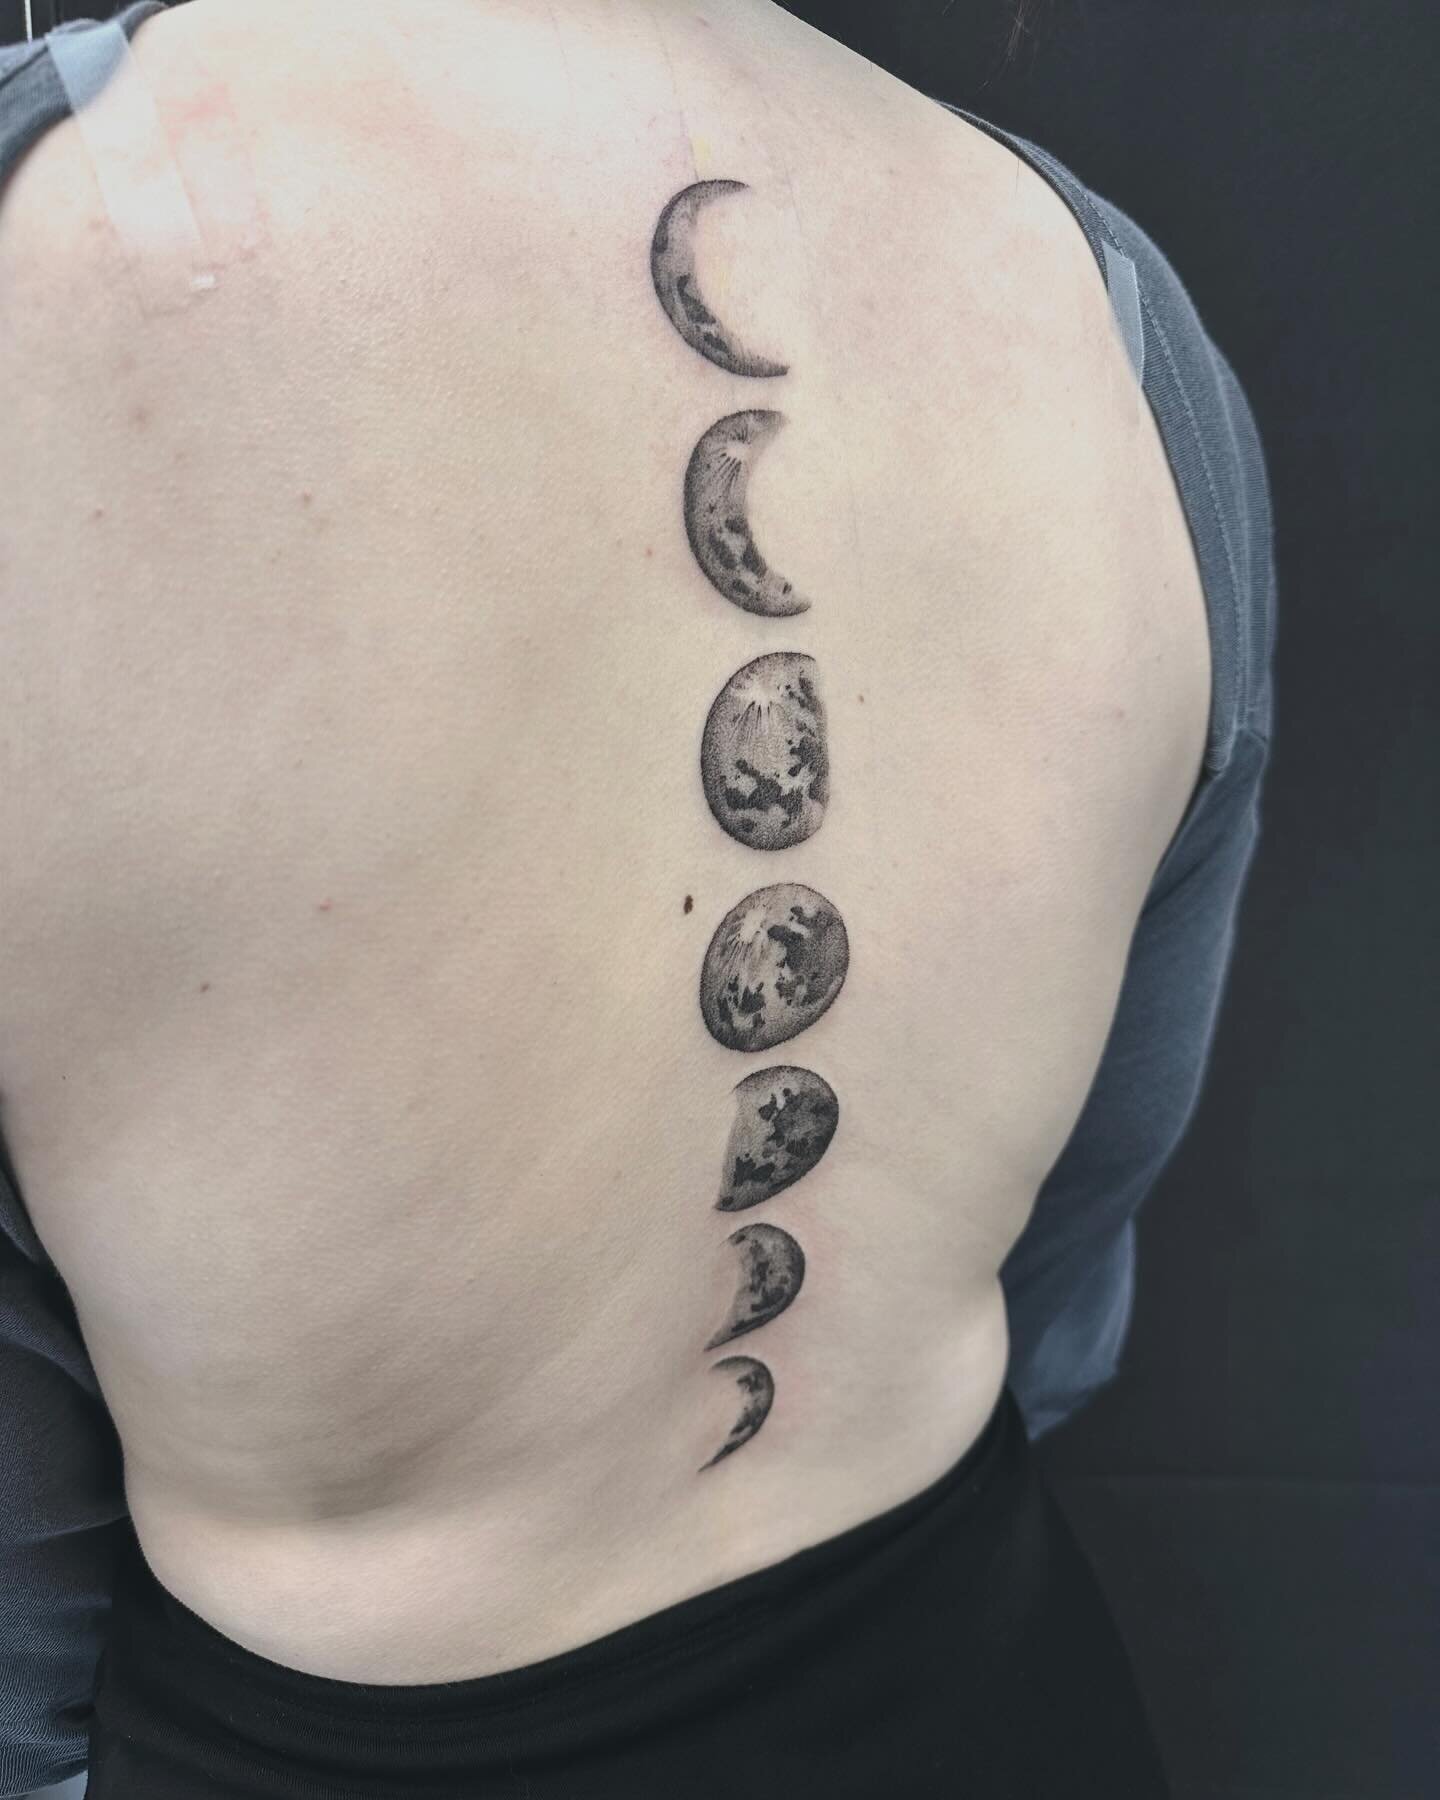 ⚜️back adornment⚜️
Thanks so much for coming in!
.
.
.
.
.
.
.
.
.
.
.
.
#tattoo #moon #moontattoo #moonphase #witch #witchy #witchesofinstagram #pagan #mothernature #moonmagic